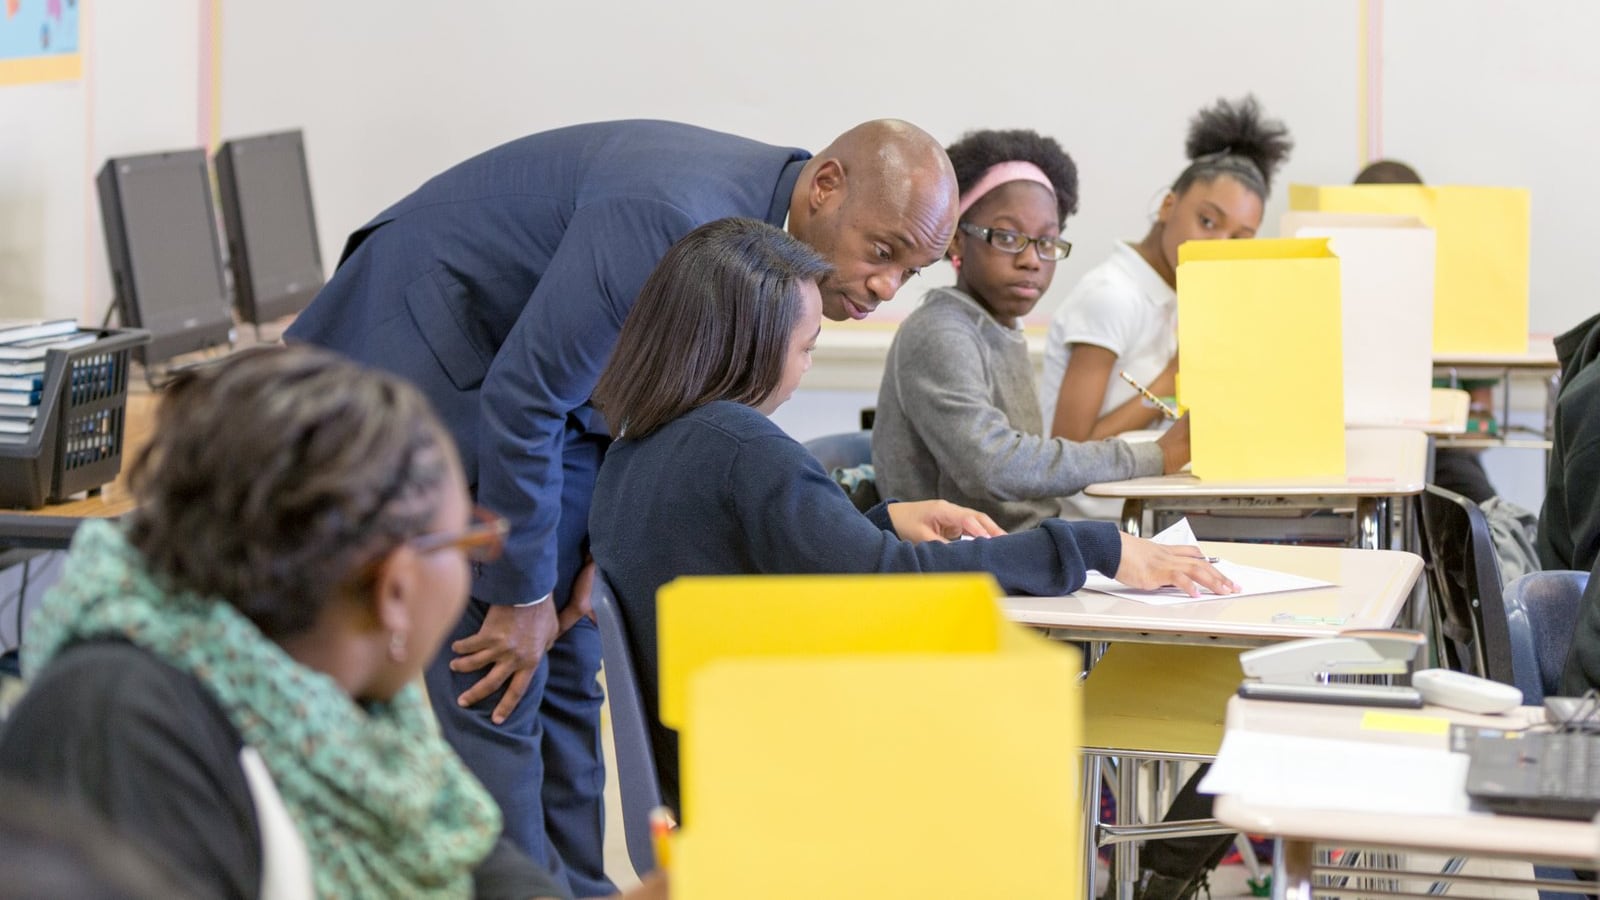 Superintendent Dorsey Hopson visits classrooms and students at Snowden School in Memphis. Hopson has proposed $50 million in cuts to staffing and programs for Shelby County Schools and describes the school system's financial situation as "dire."